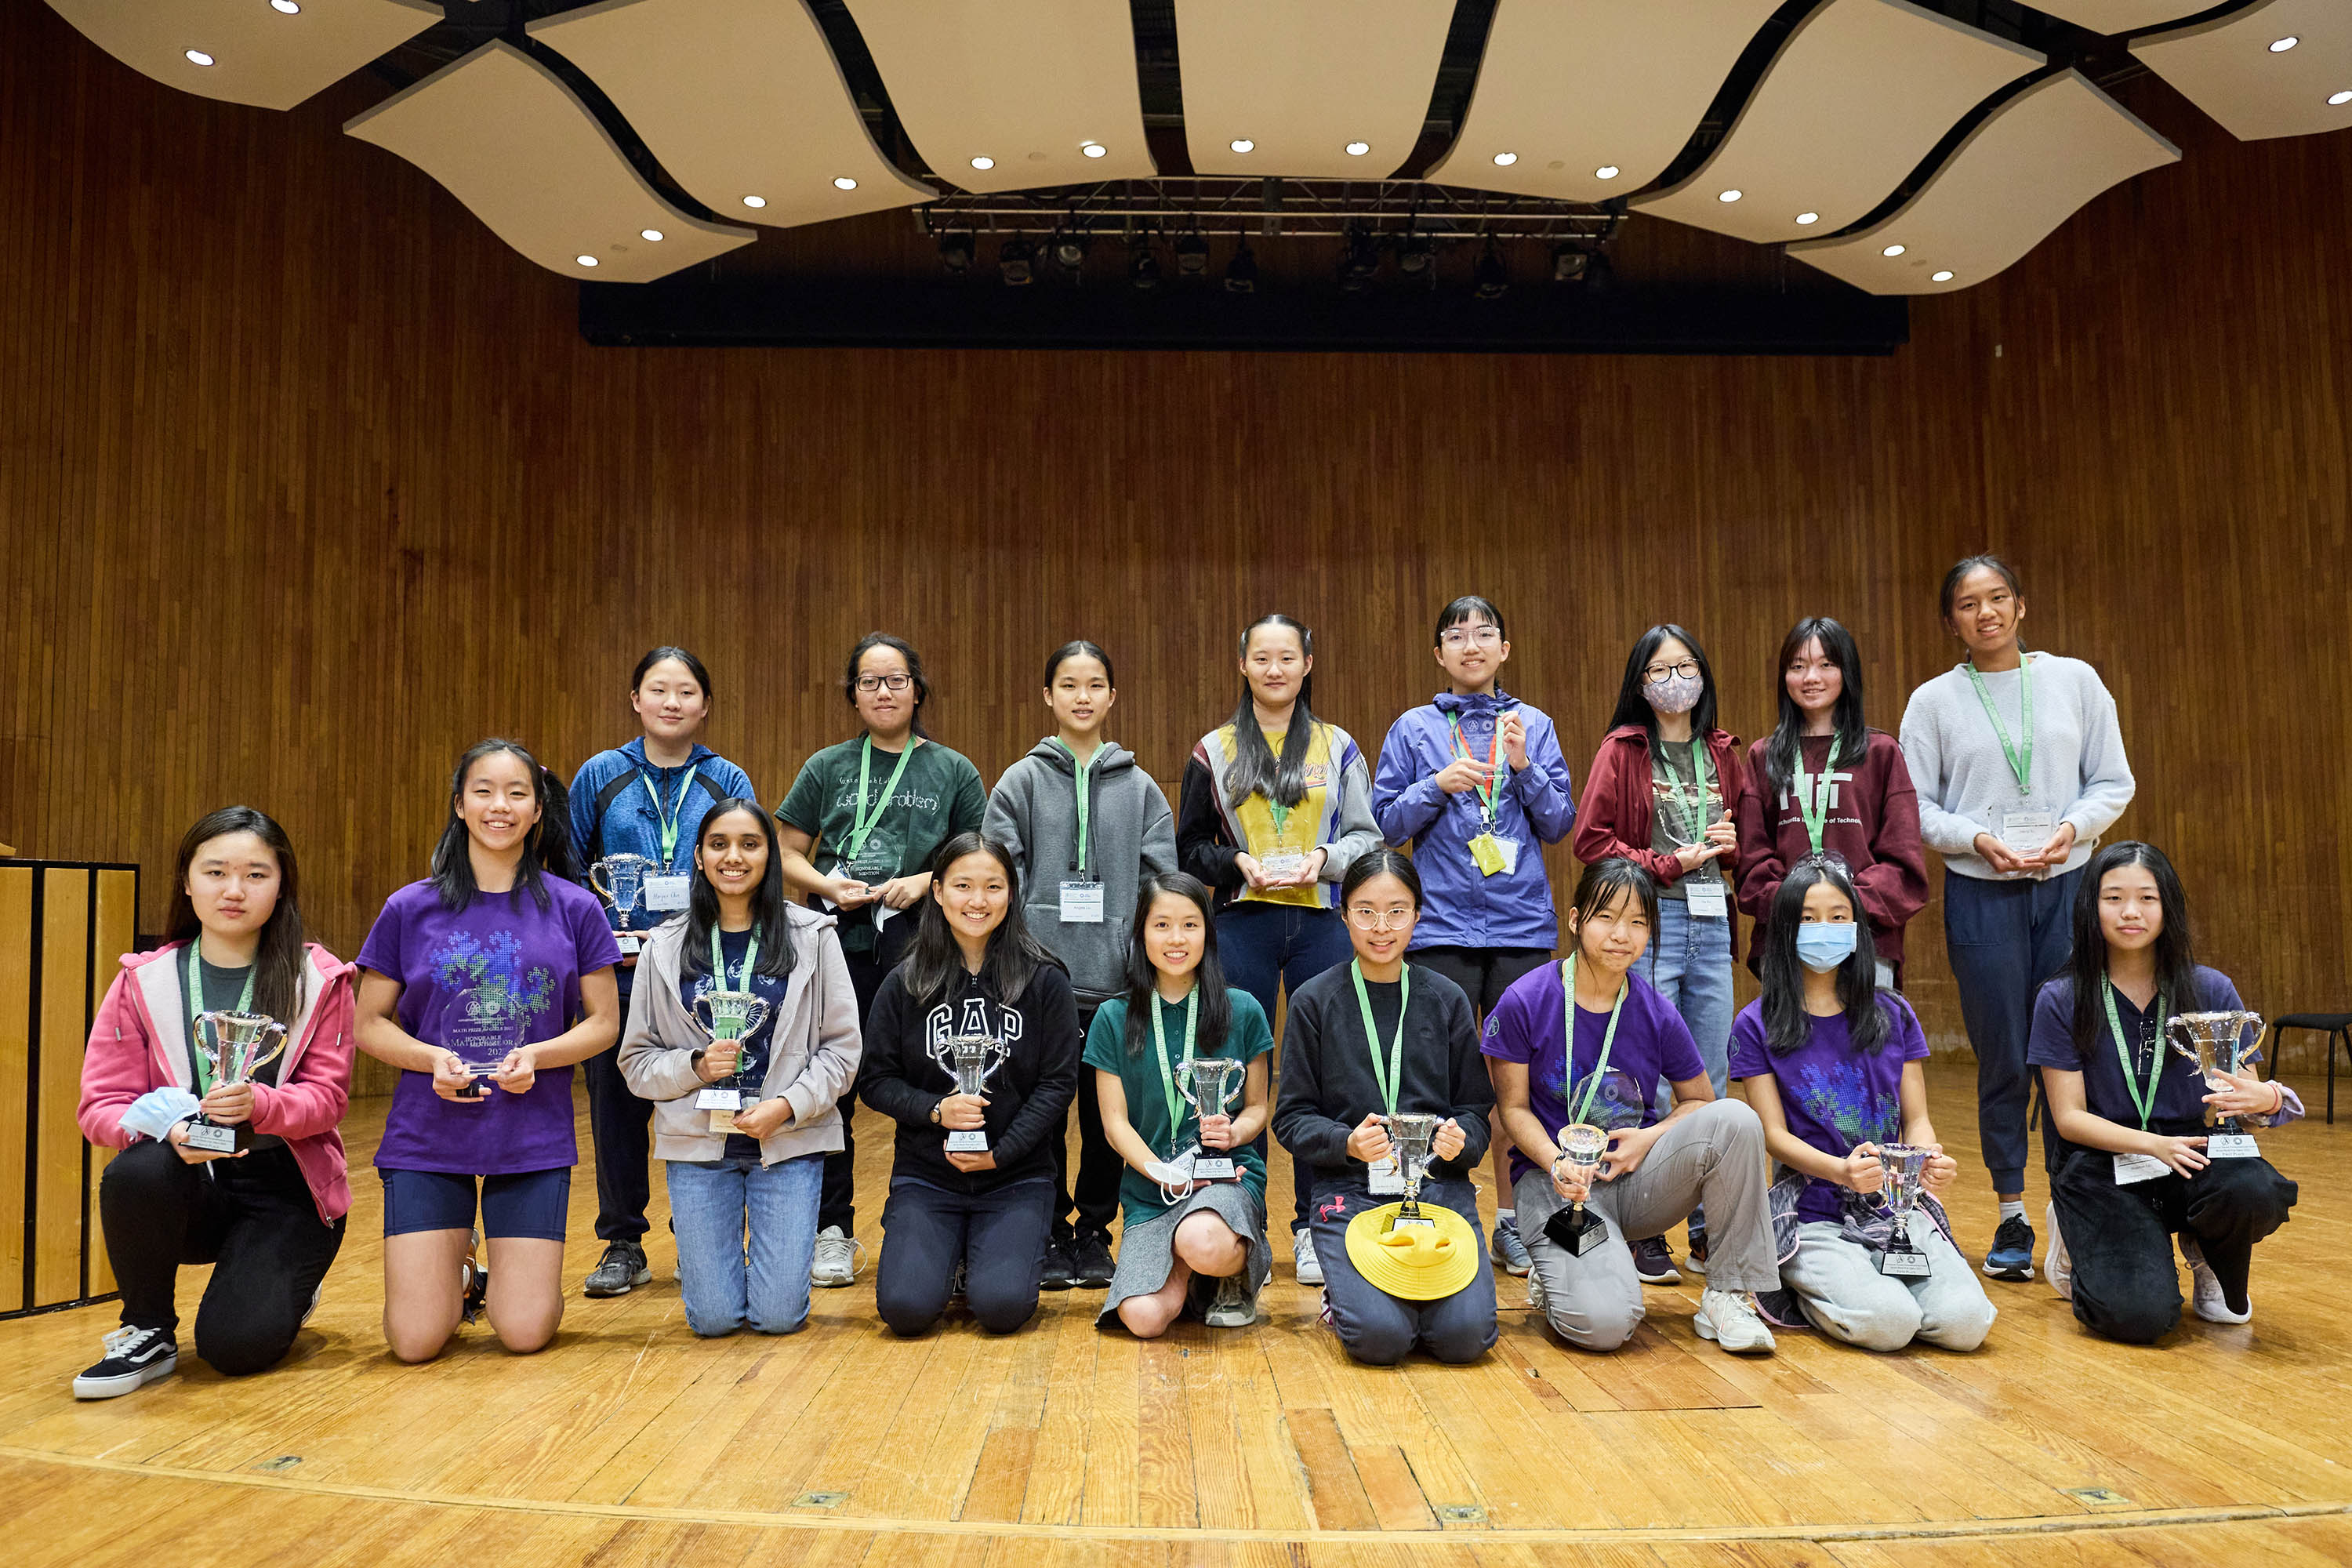 Winners of the 14th annual Math Prize for Girls, held at MIT and sponsored by the Advantage Testing Foundation and global trading firm Jane Street include Jessica Wan (kneeling, far right), who was the contest's overall winner.